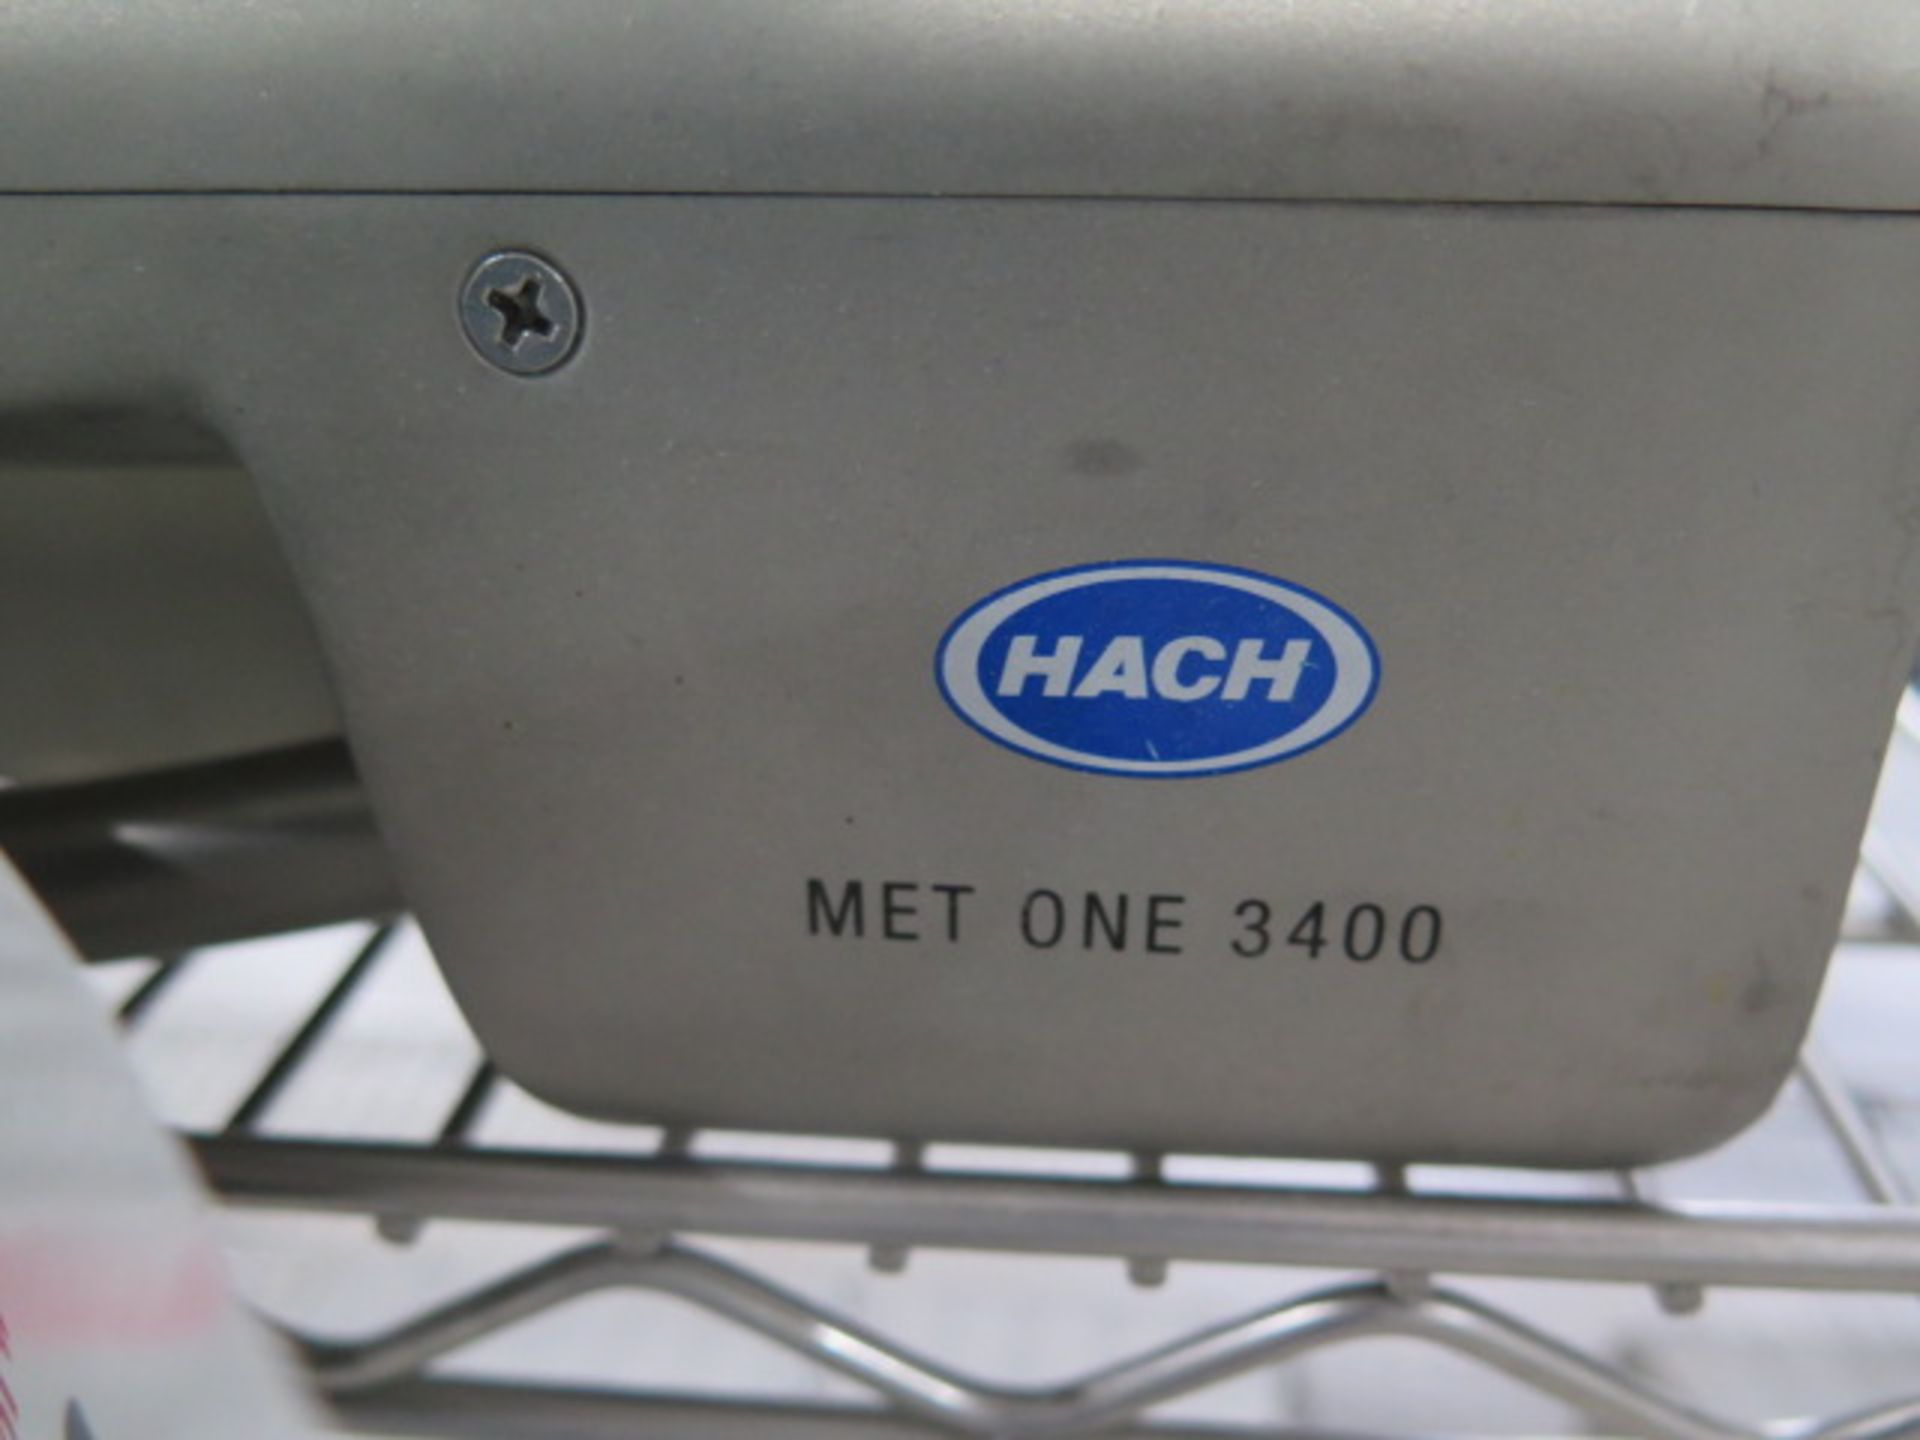 Hach MET ONE 3400 mdl. 3445 Particle Counter w/ Printer (SOLD AS-IS - NO WARRANTY) - Image 7 of 7